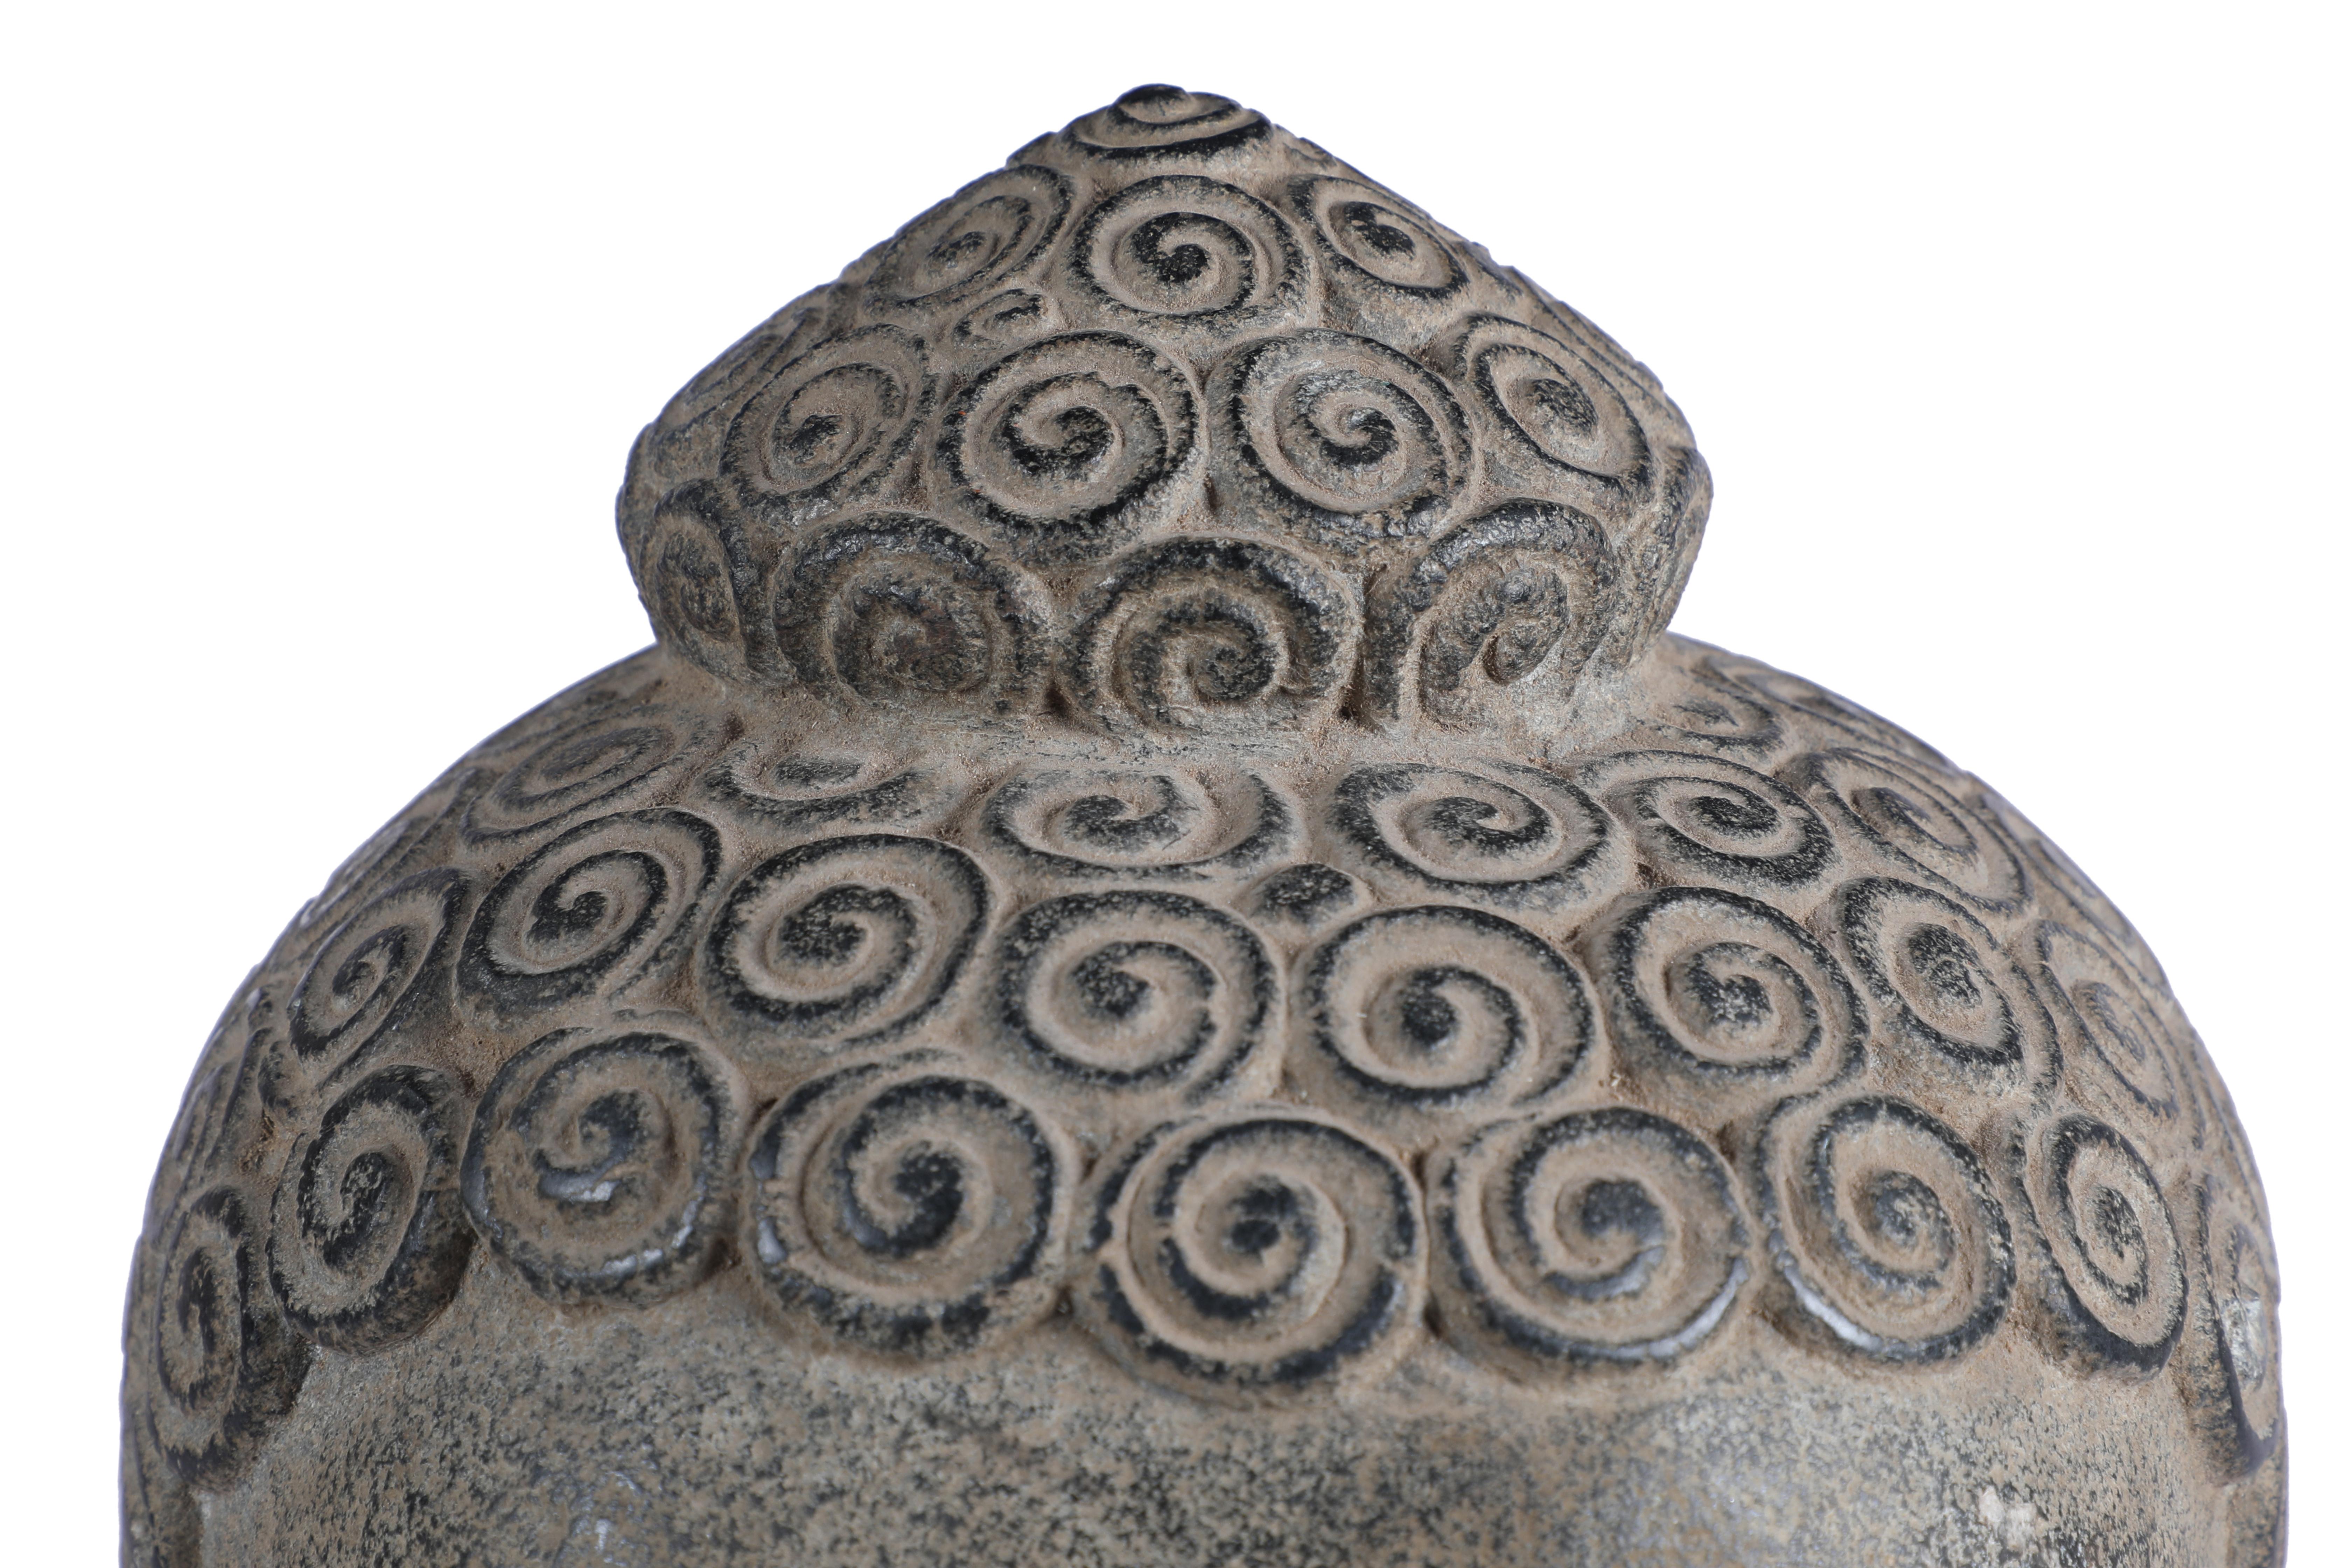 A lovely, peaceful granite Buddha head on wooden base, early 1900's, Utttar Pradesh, Northern India. The hand-carved features include the typical snail-shell curled hair, elongated ears, half-closed eyes and serene smile. The Ushnisha crown depicts